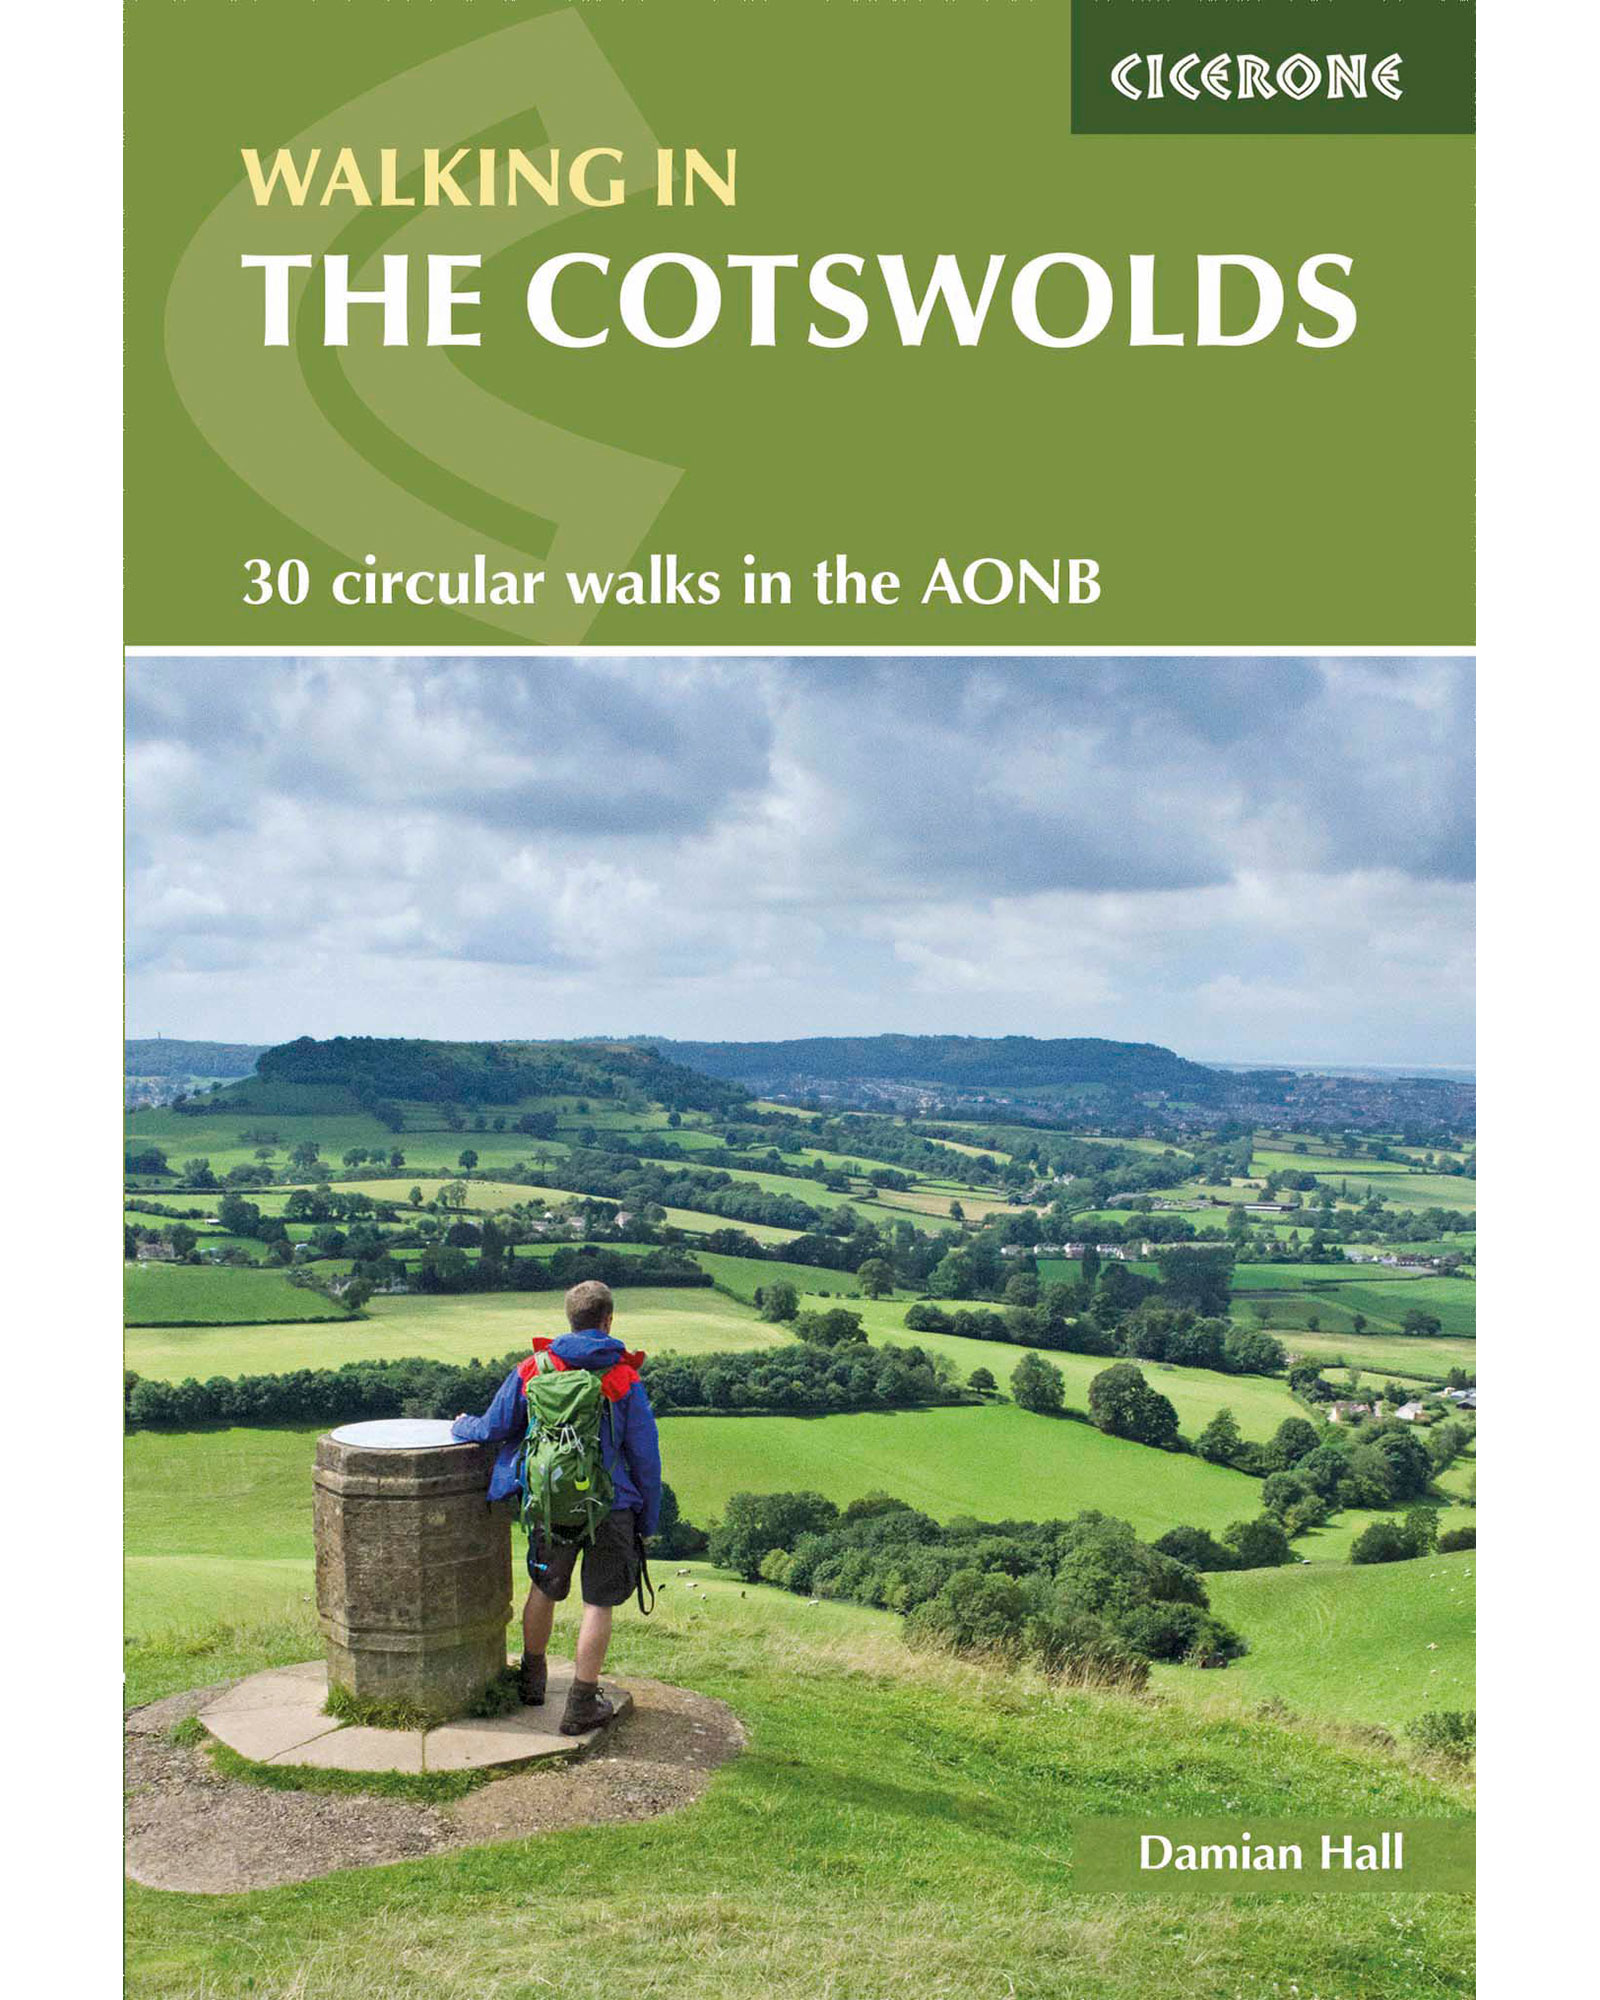 Cicerone Walking in the Cotswolds Guide Book